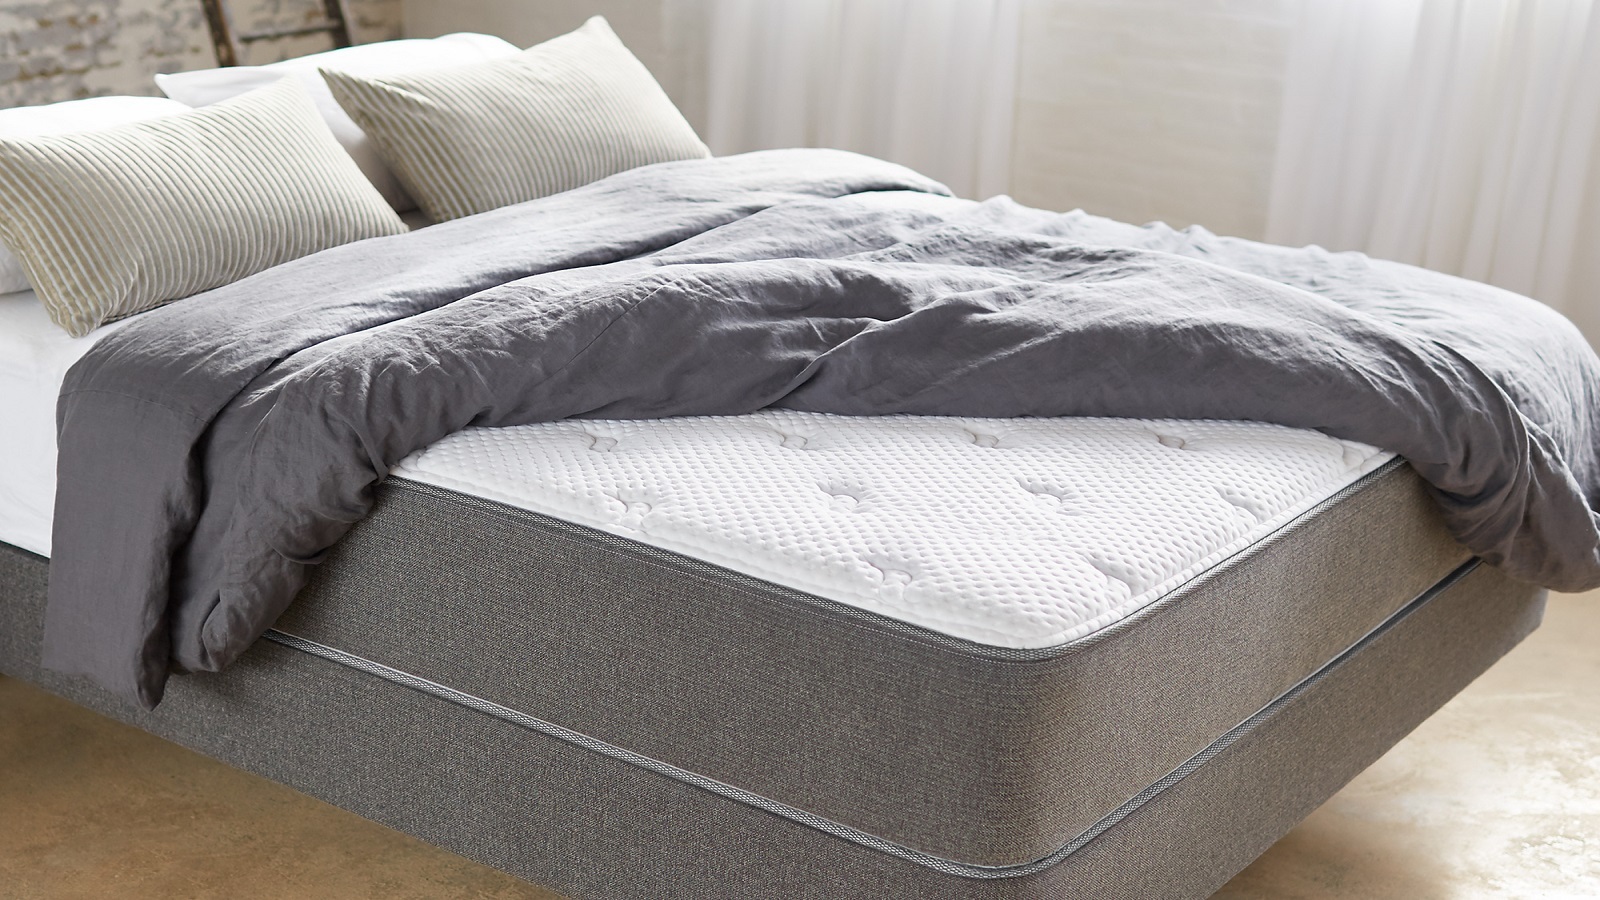 Aviya Mattress Review: Would You Go For It